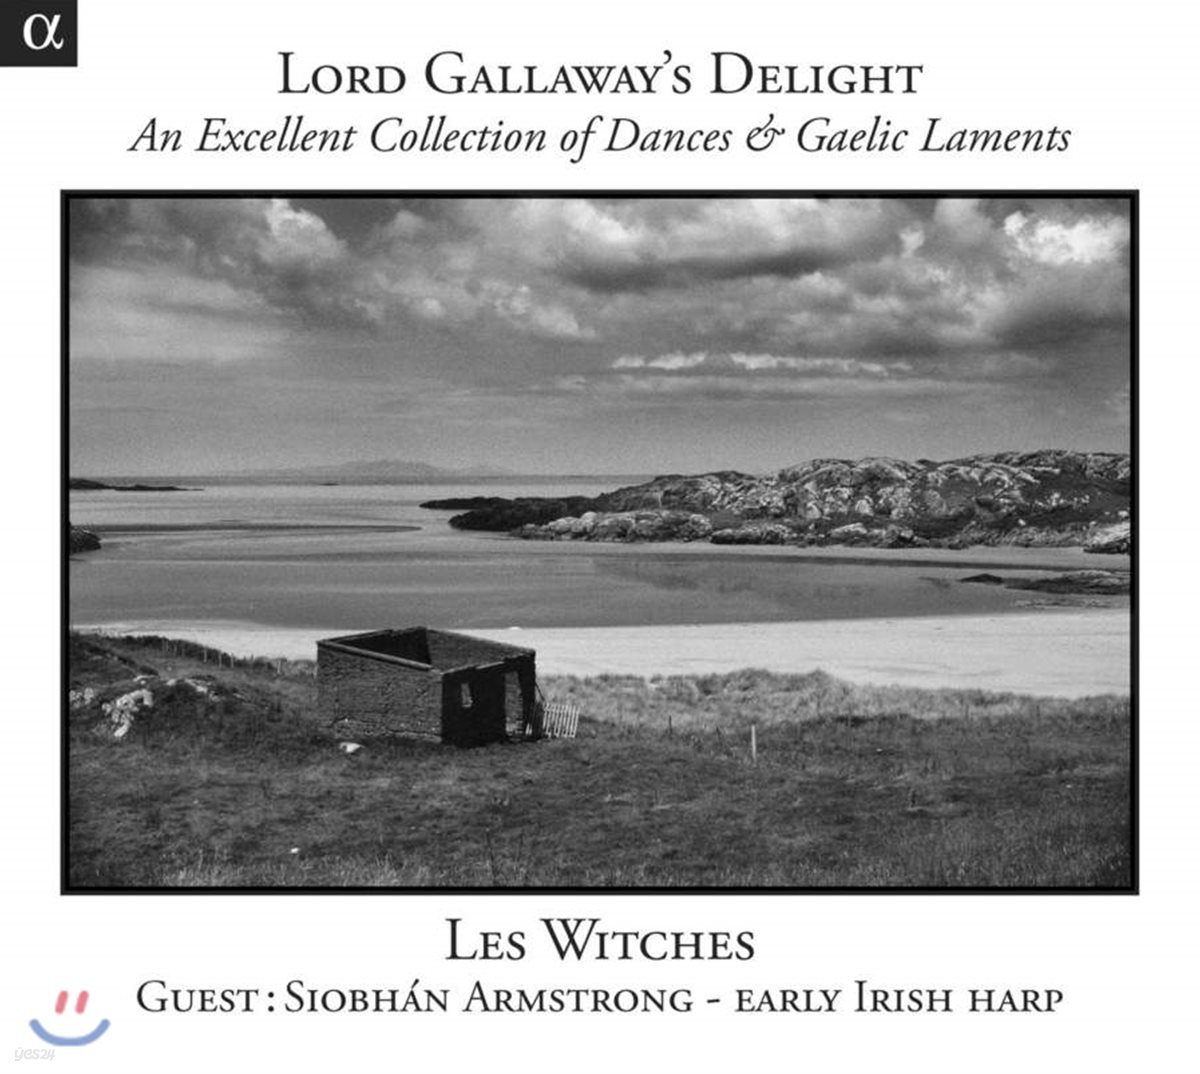 Les Witches 갤러웨이 경의 기쁨 - 16, 17세기 켈트 춤곡과 라멘트 (Lord Gallaway's Delight - An Excellent Collection of Dances and Gaelic Laments)